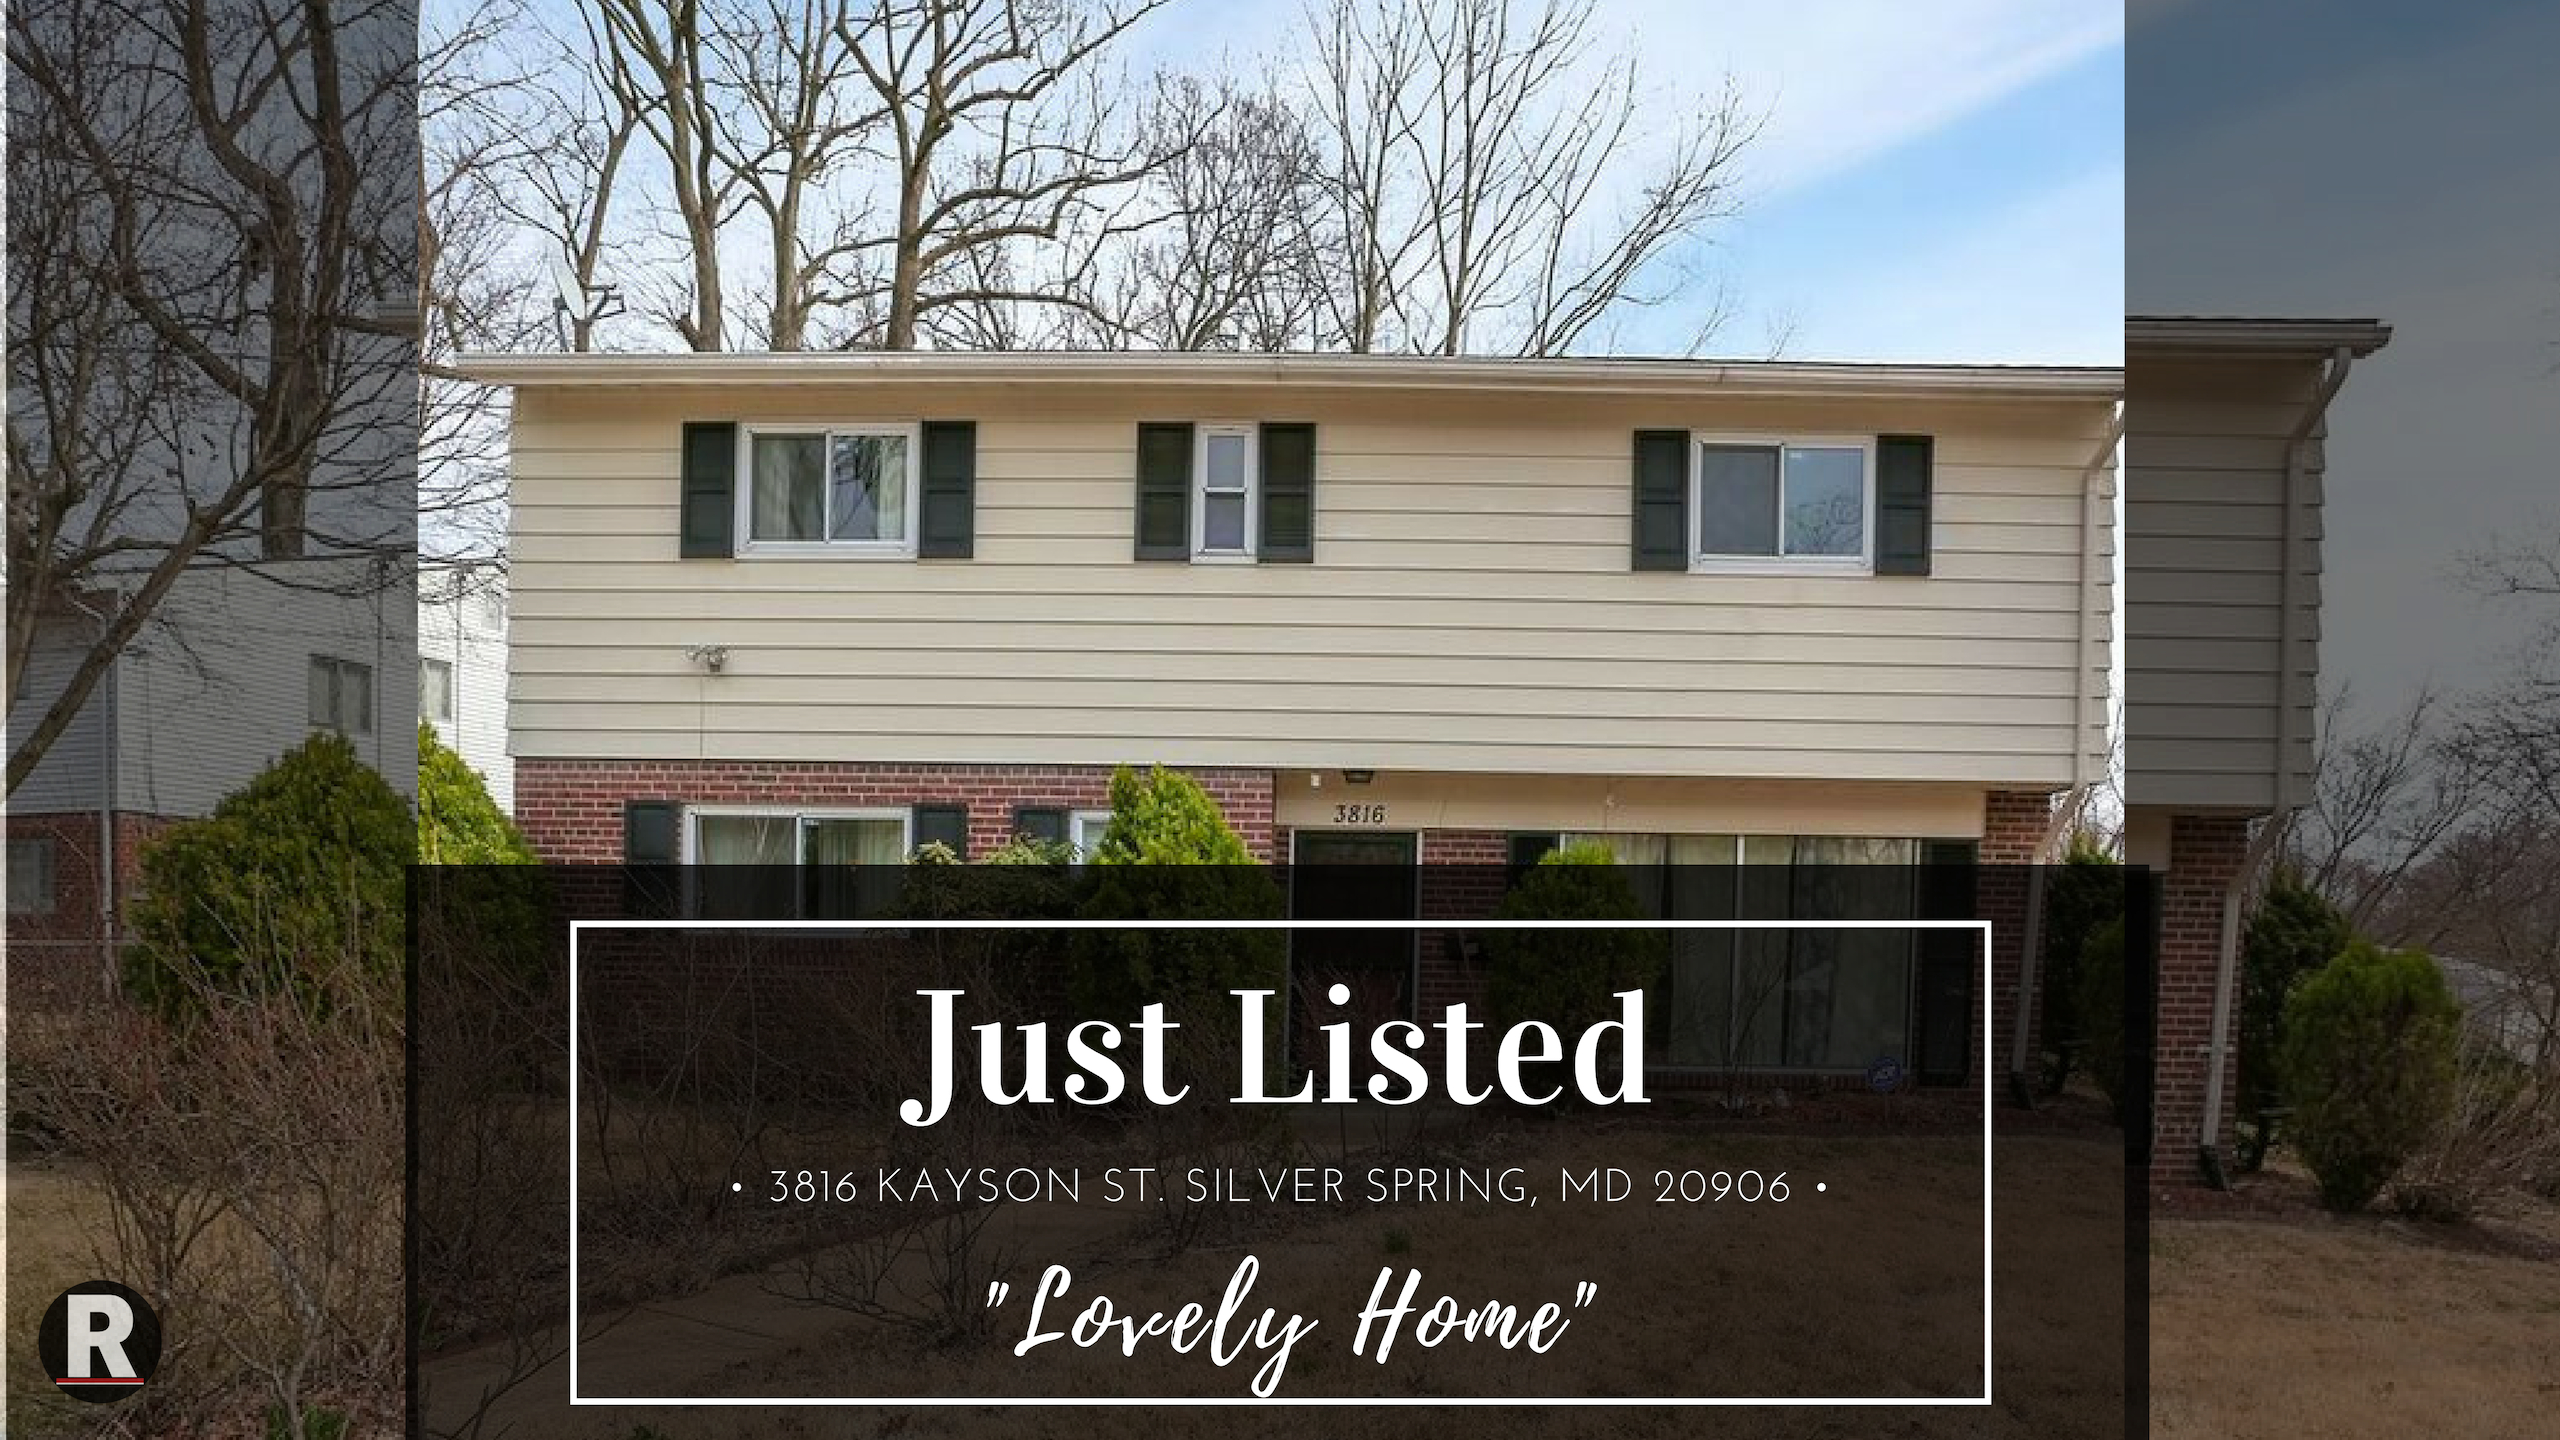 Just Listed! 3816 Kayson St. Silver Spring, MD 20906